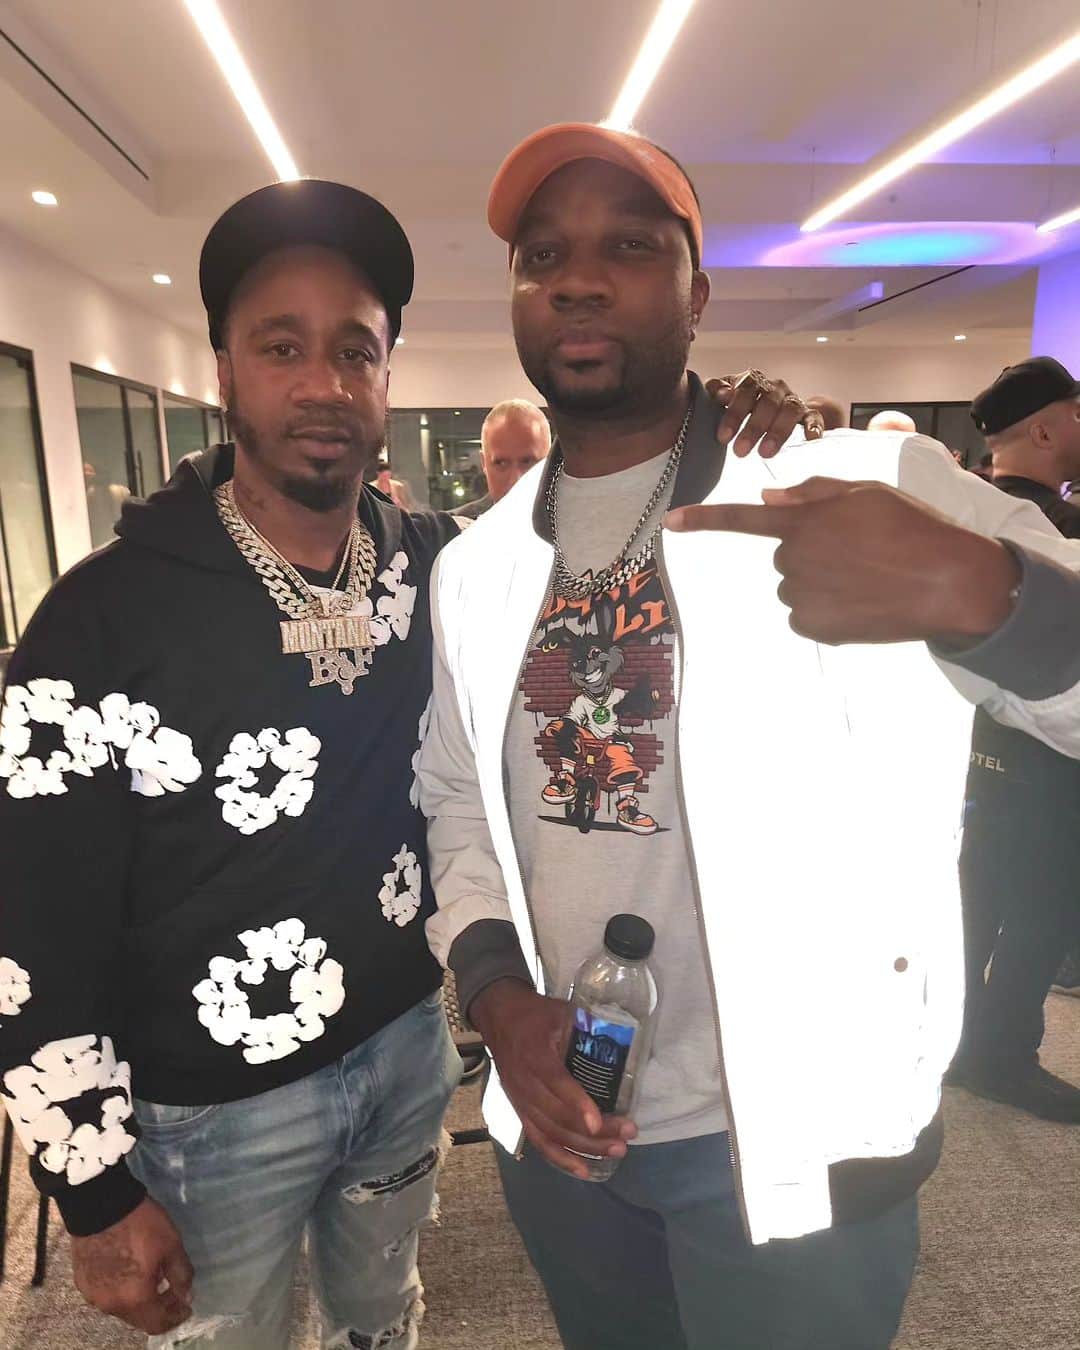 call me Lix the 6-Toyのインスタグラム：「L'chaim!!! 🍻 The Butchers Coming! Bugzee Lix x Benny The Butcher @getbenny link up at last night's @bjealliance Black-Jewish Entertainment Alliance event. Manifest Destiny album in stores now. Get ready for my 9 Lives: The Urban My of Bugzee Lix documentary. Coming soon.  Thank you @recordingacademy for inviting me to this illustrious hiphop event. Hope there are Many more here in the Big 🍎  #yomkippur #jewish #Griselda #rocnation  @griseldarecords @shadyrecords @rocnation @eone @entertainmentonedist」